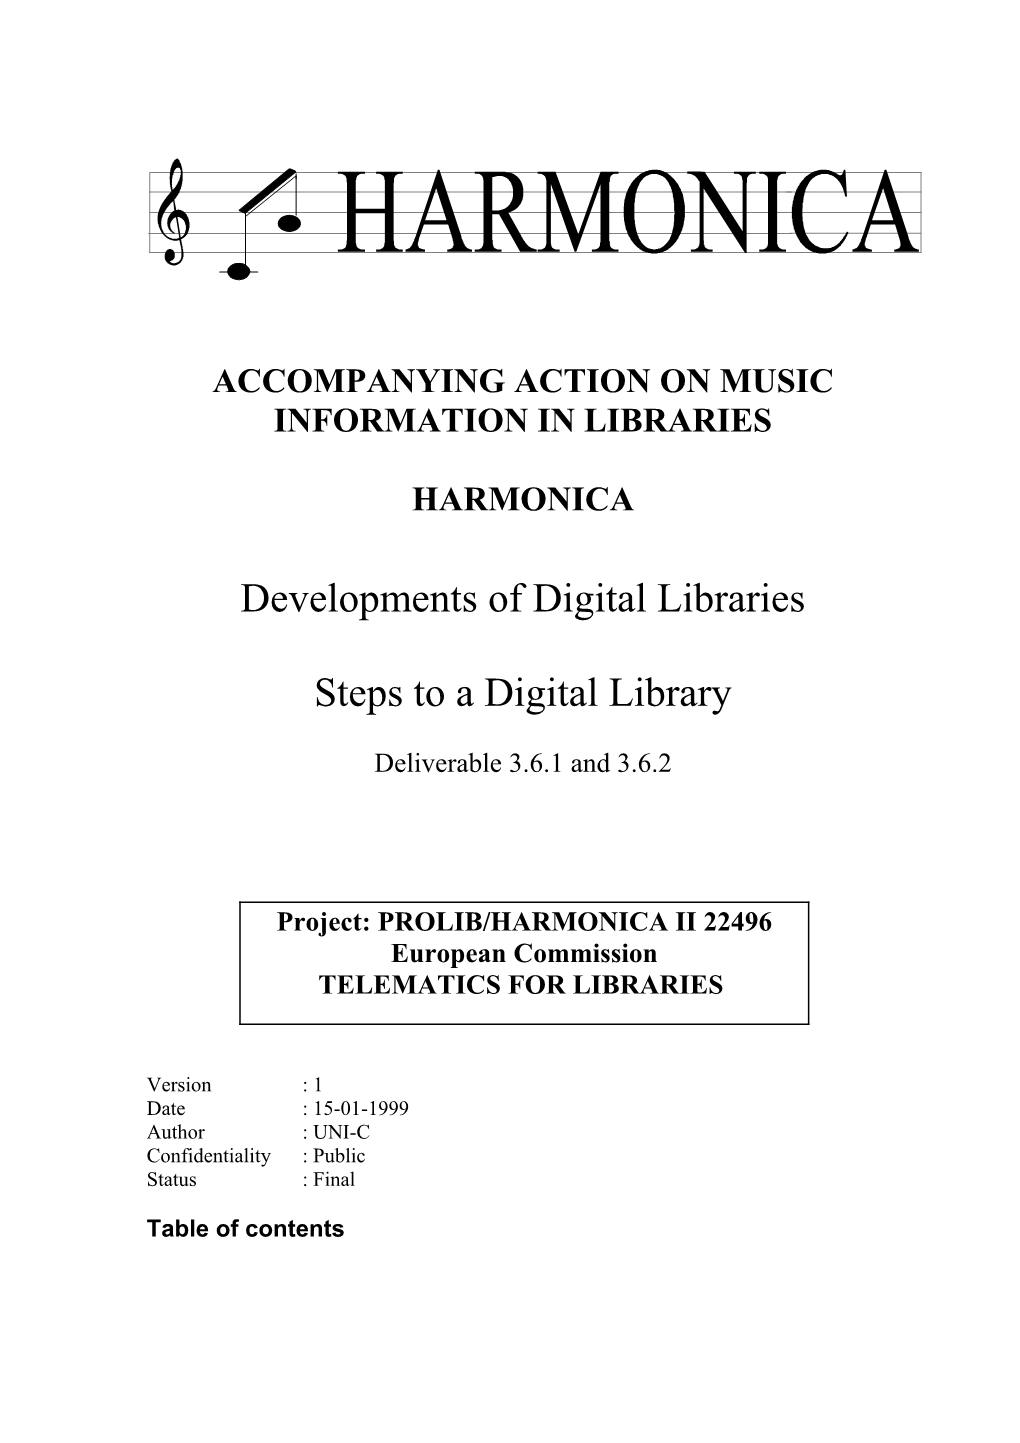 Accompanying Action on Music Information in Libraries